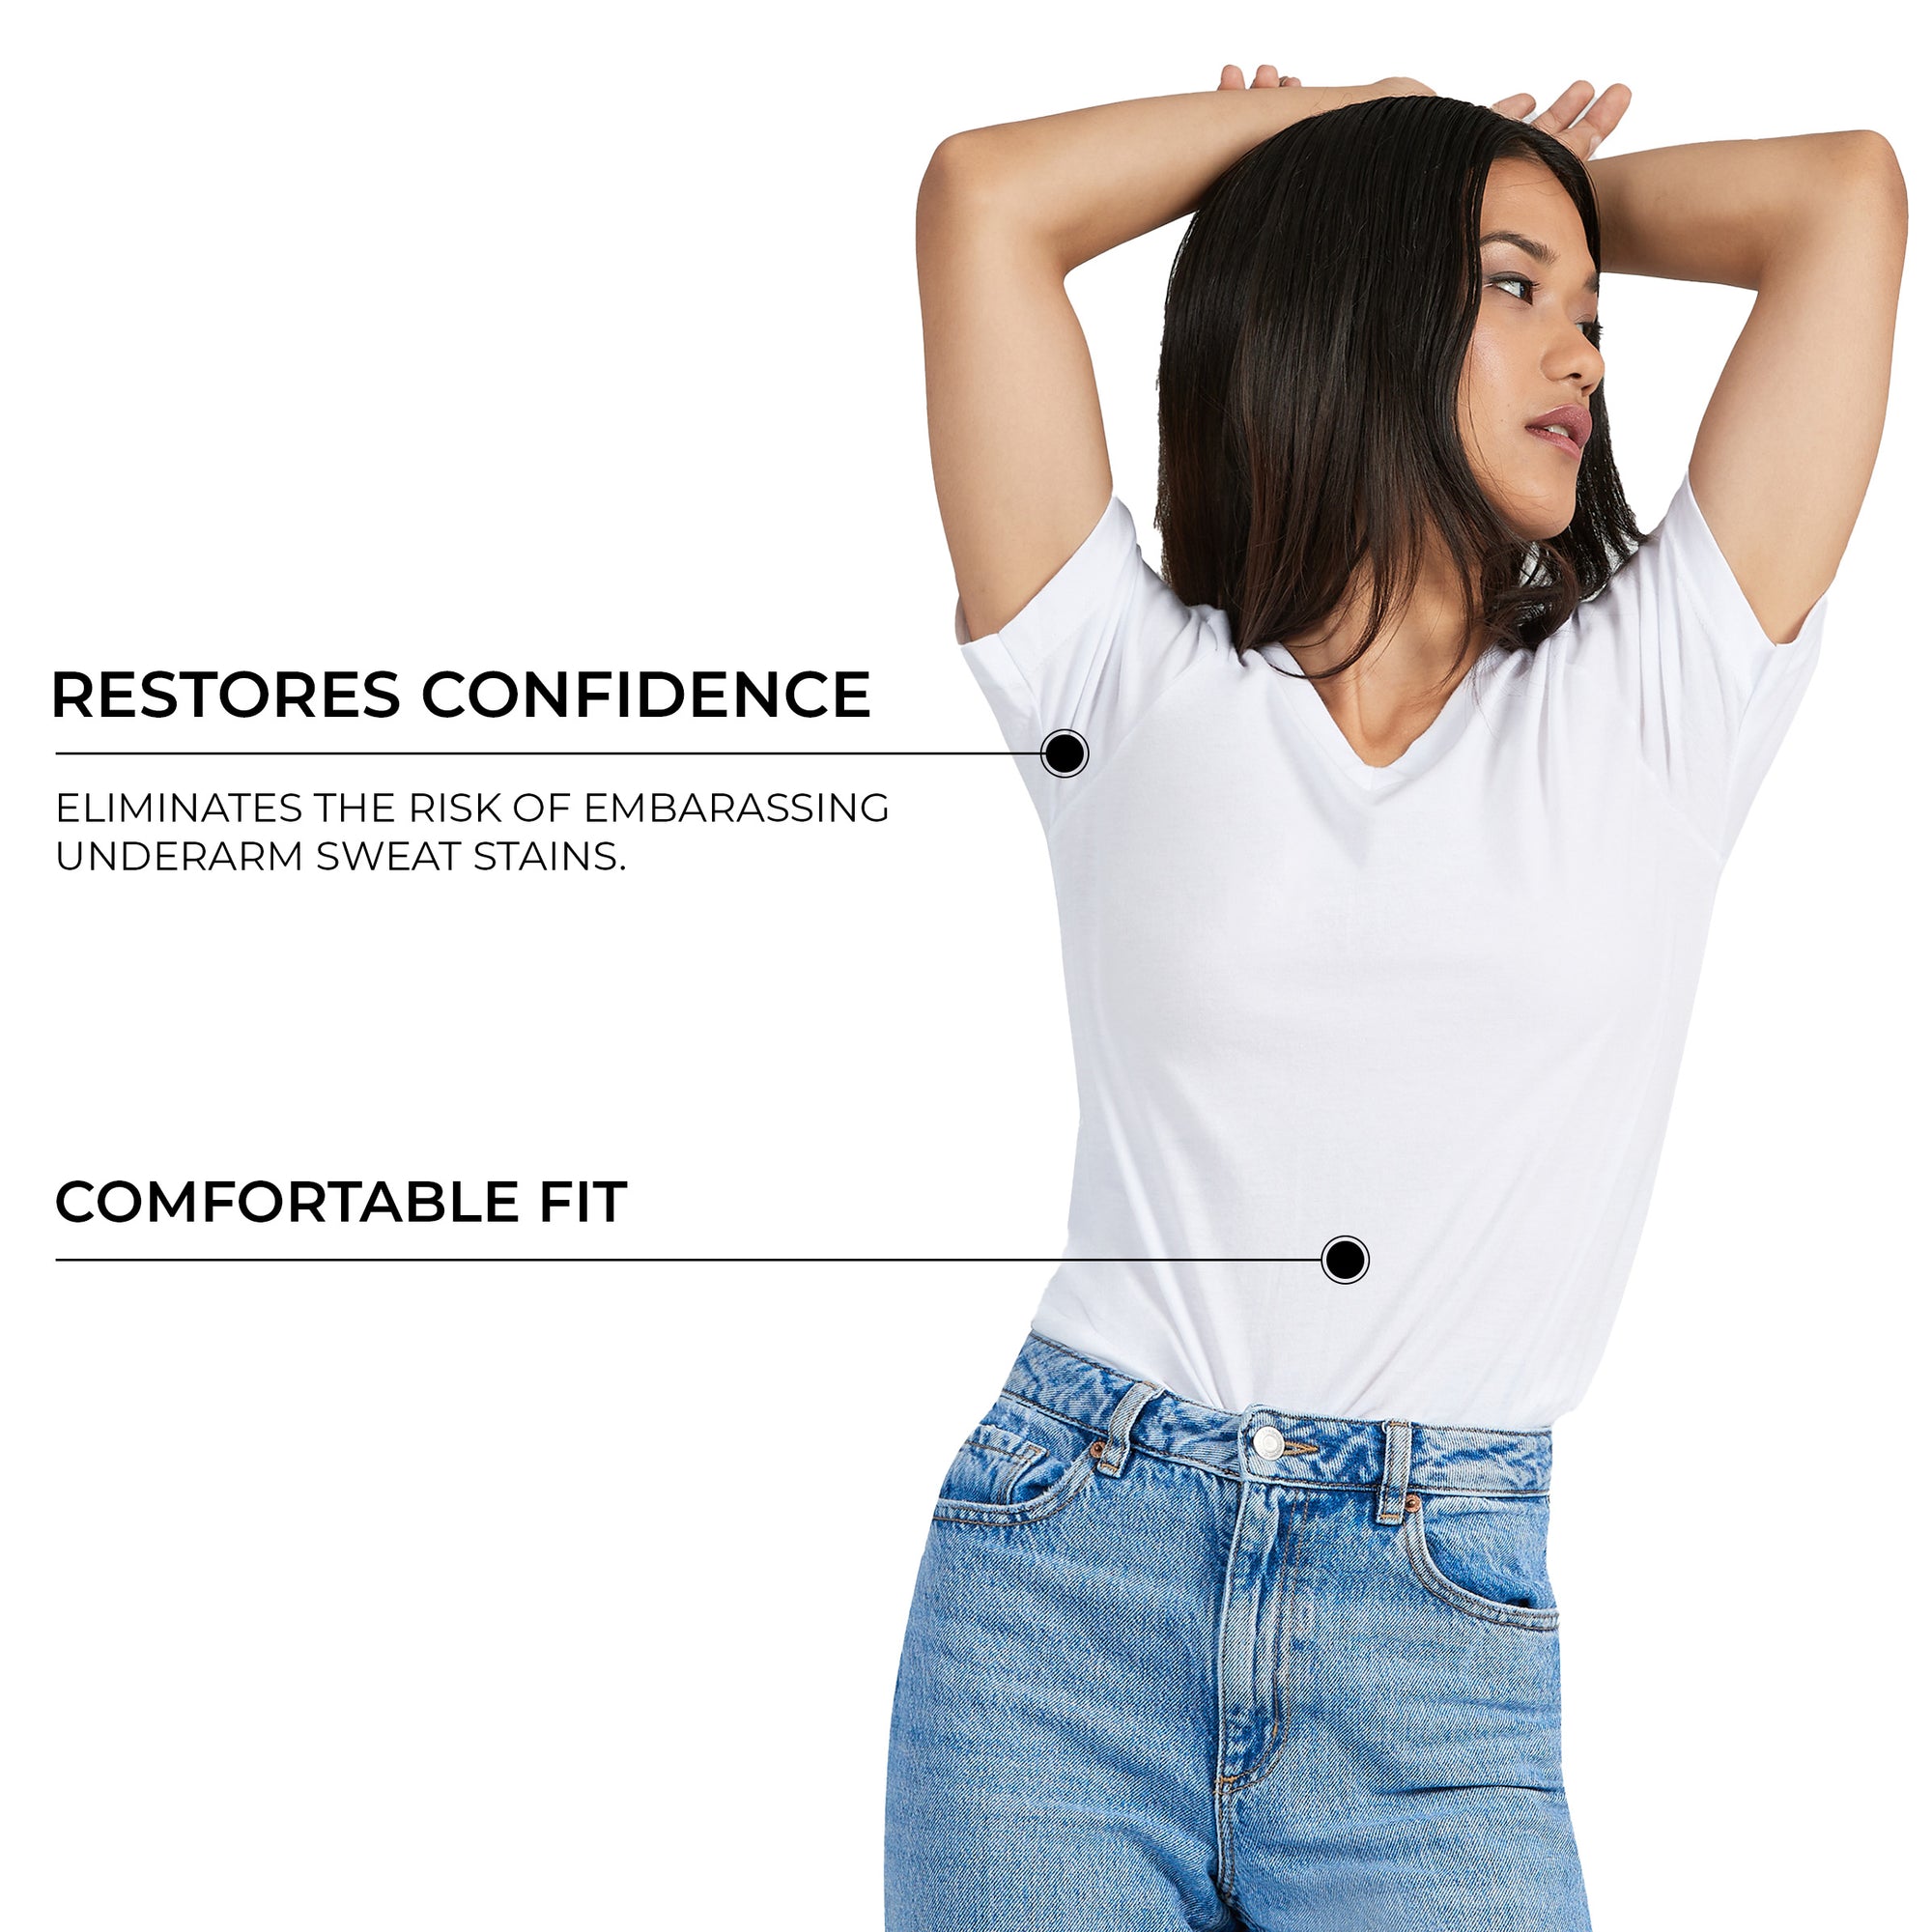 Sweat proof undershirts restore confidence and fit comfortably. | Social Citizen